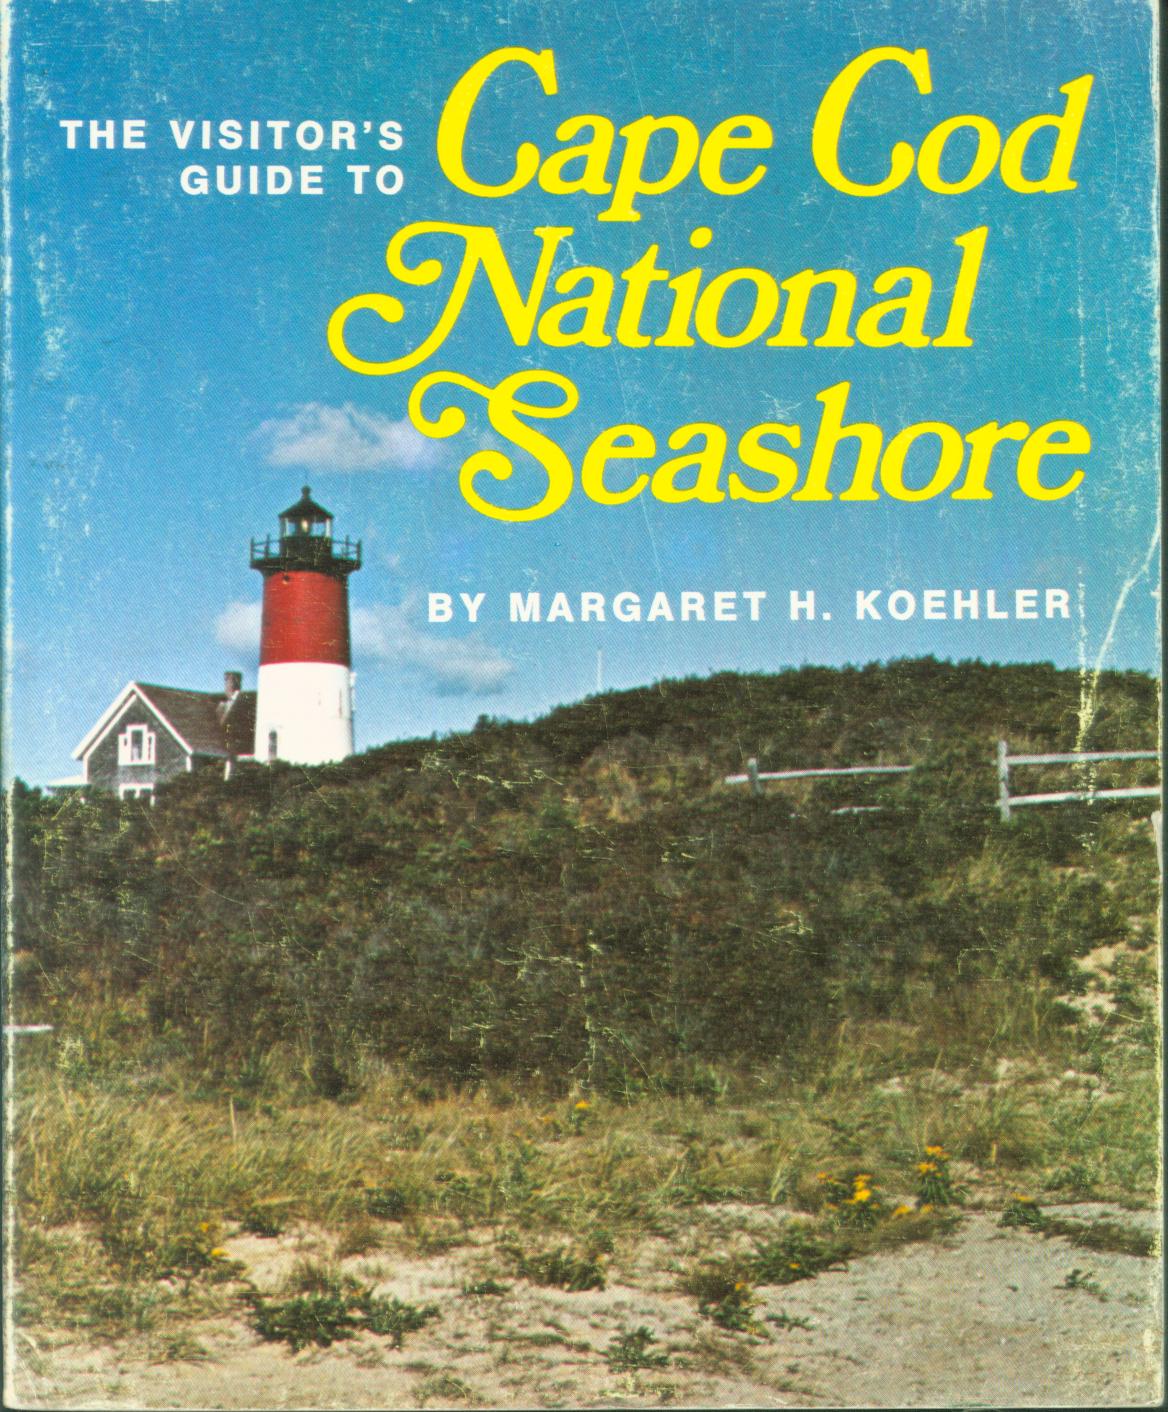 HE VISITOR'S GUIDE TO CAPE COD NATIONAL SEASHORE. 